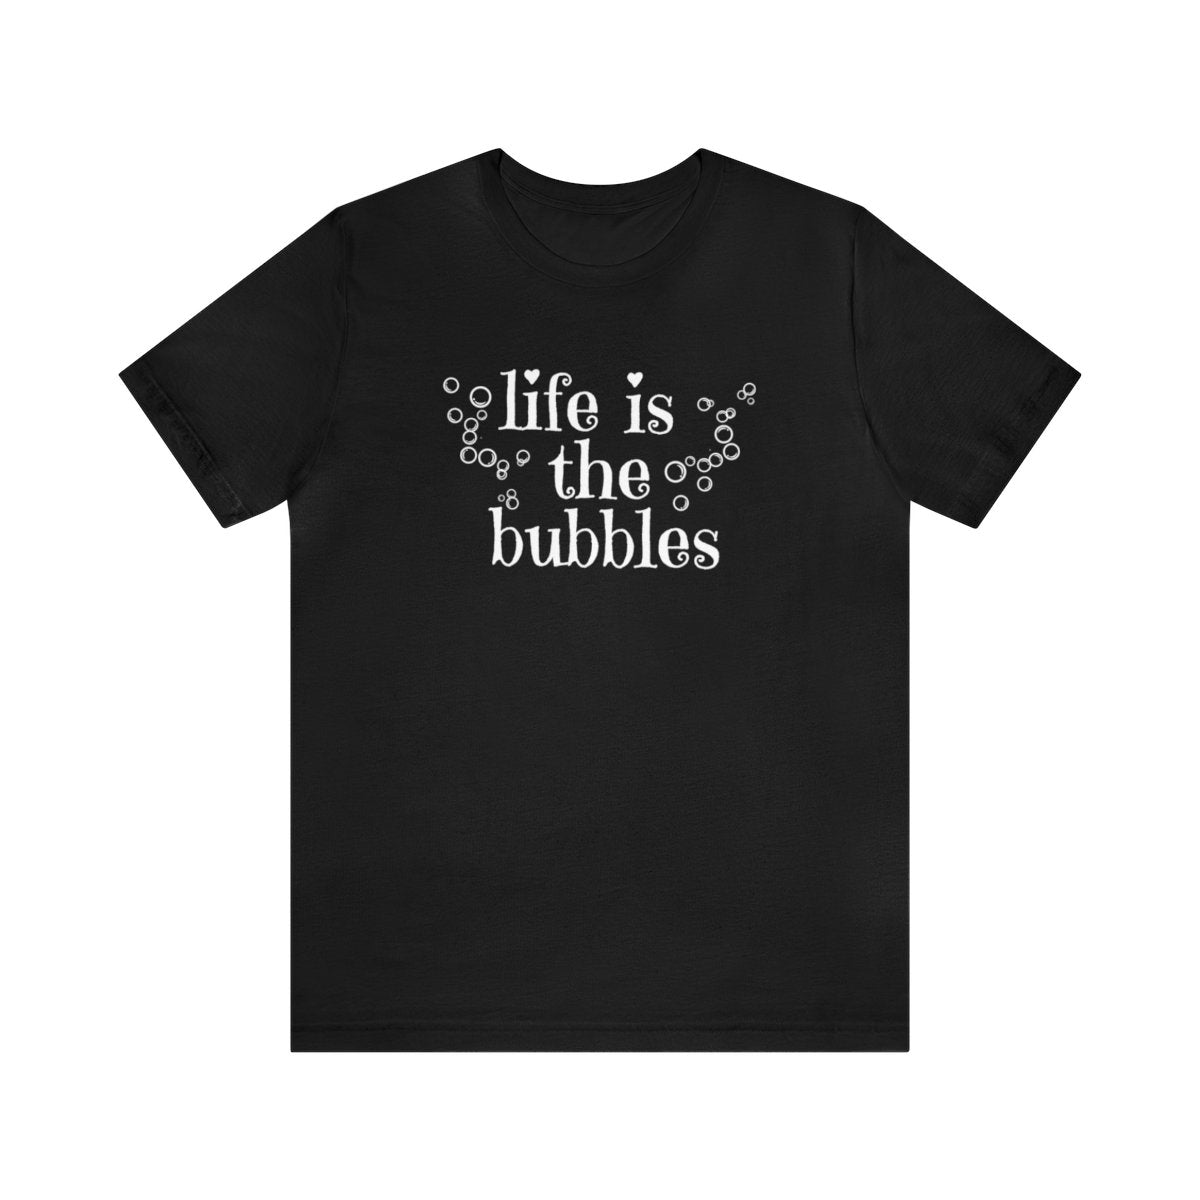 Adult Crew Neck Life is the Bubbles